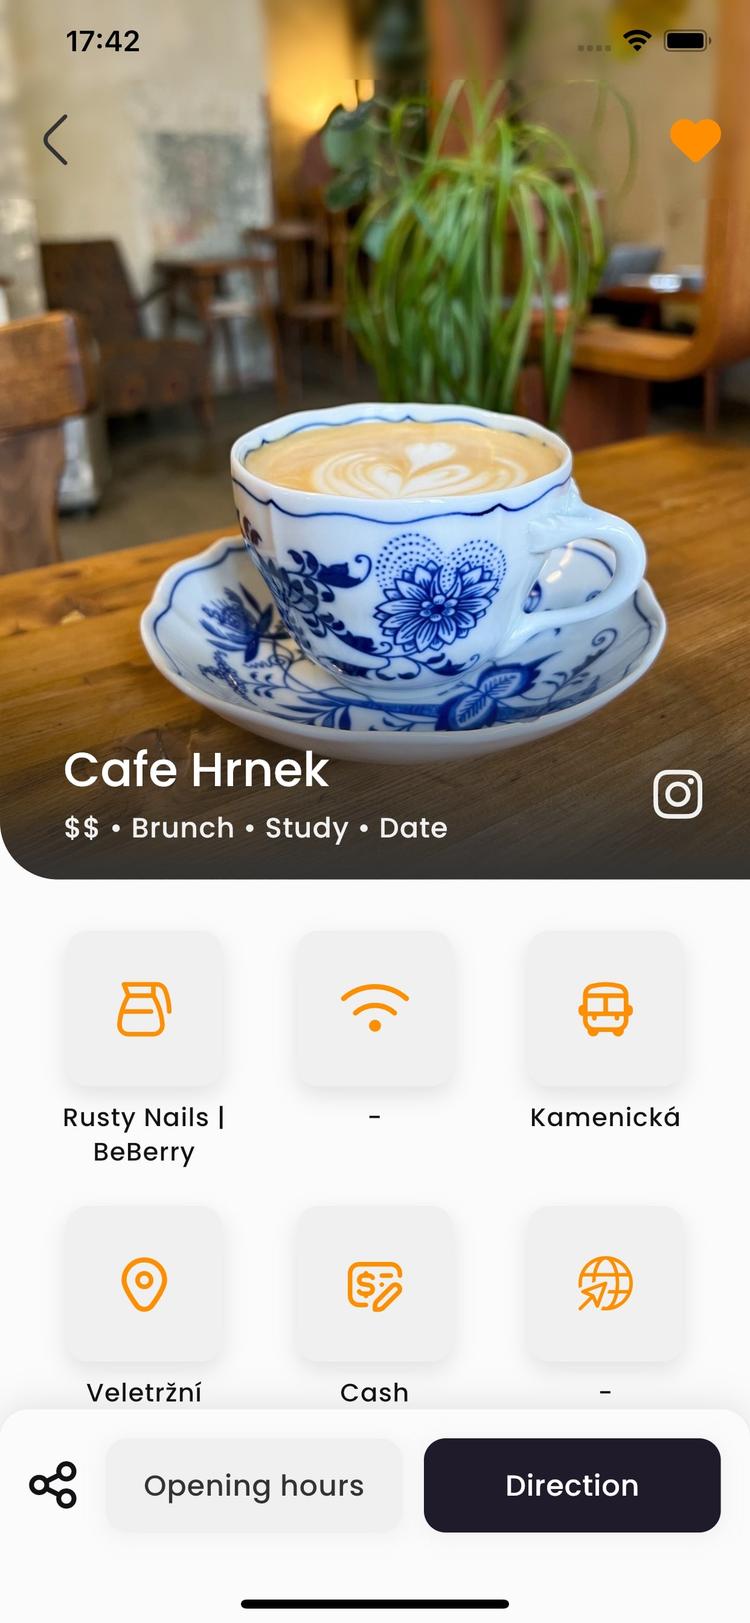 Look at cafe business in detail